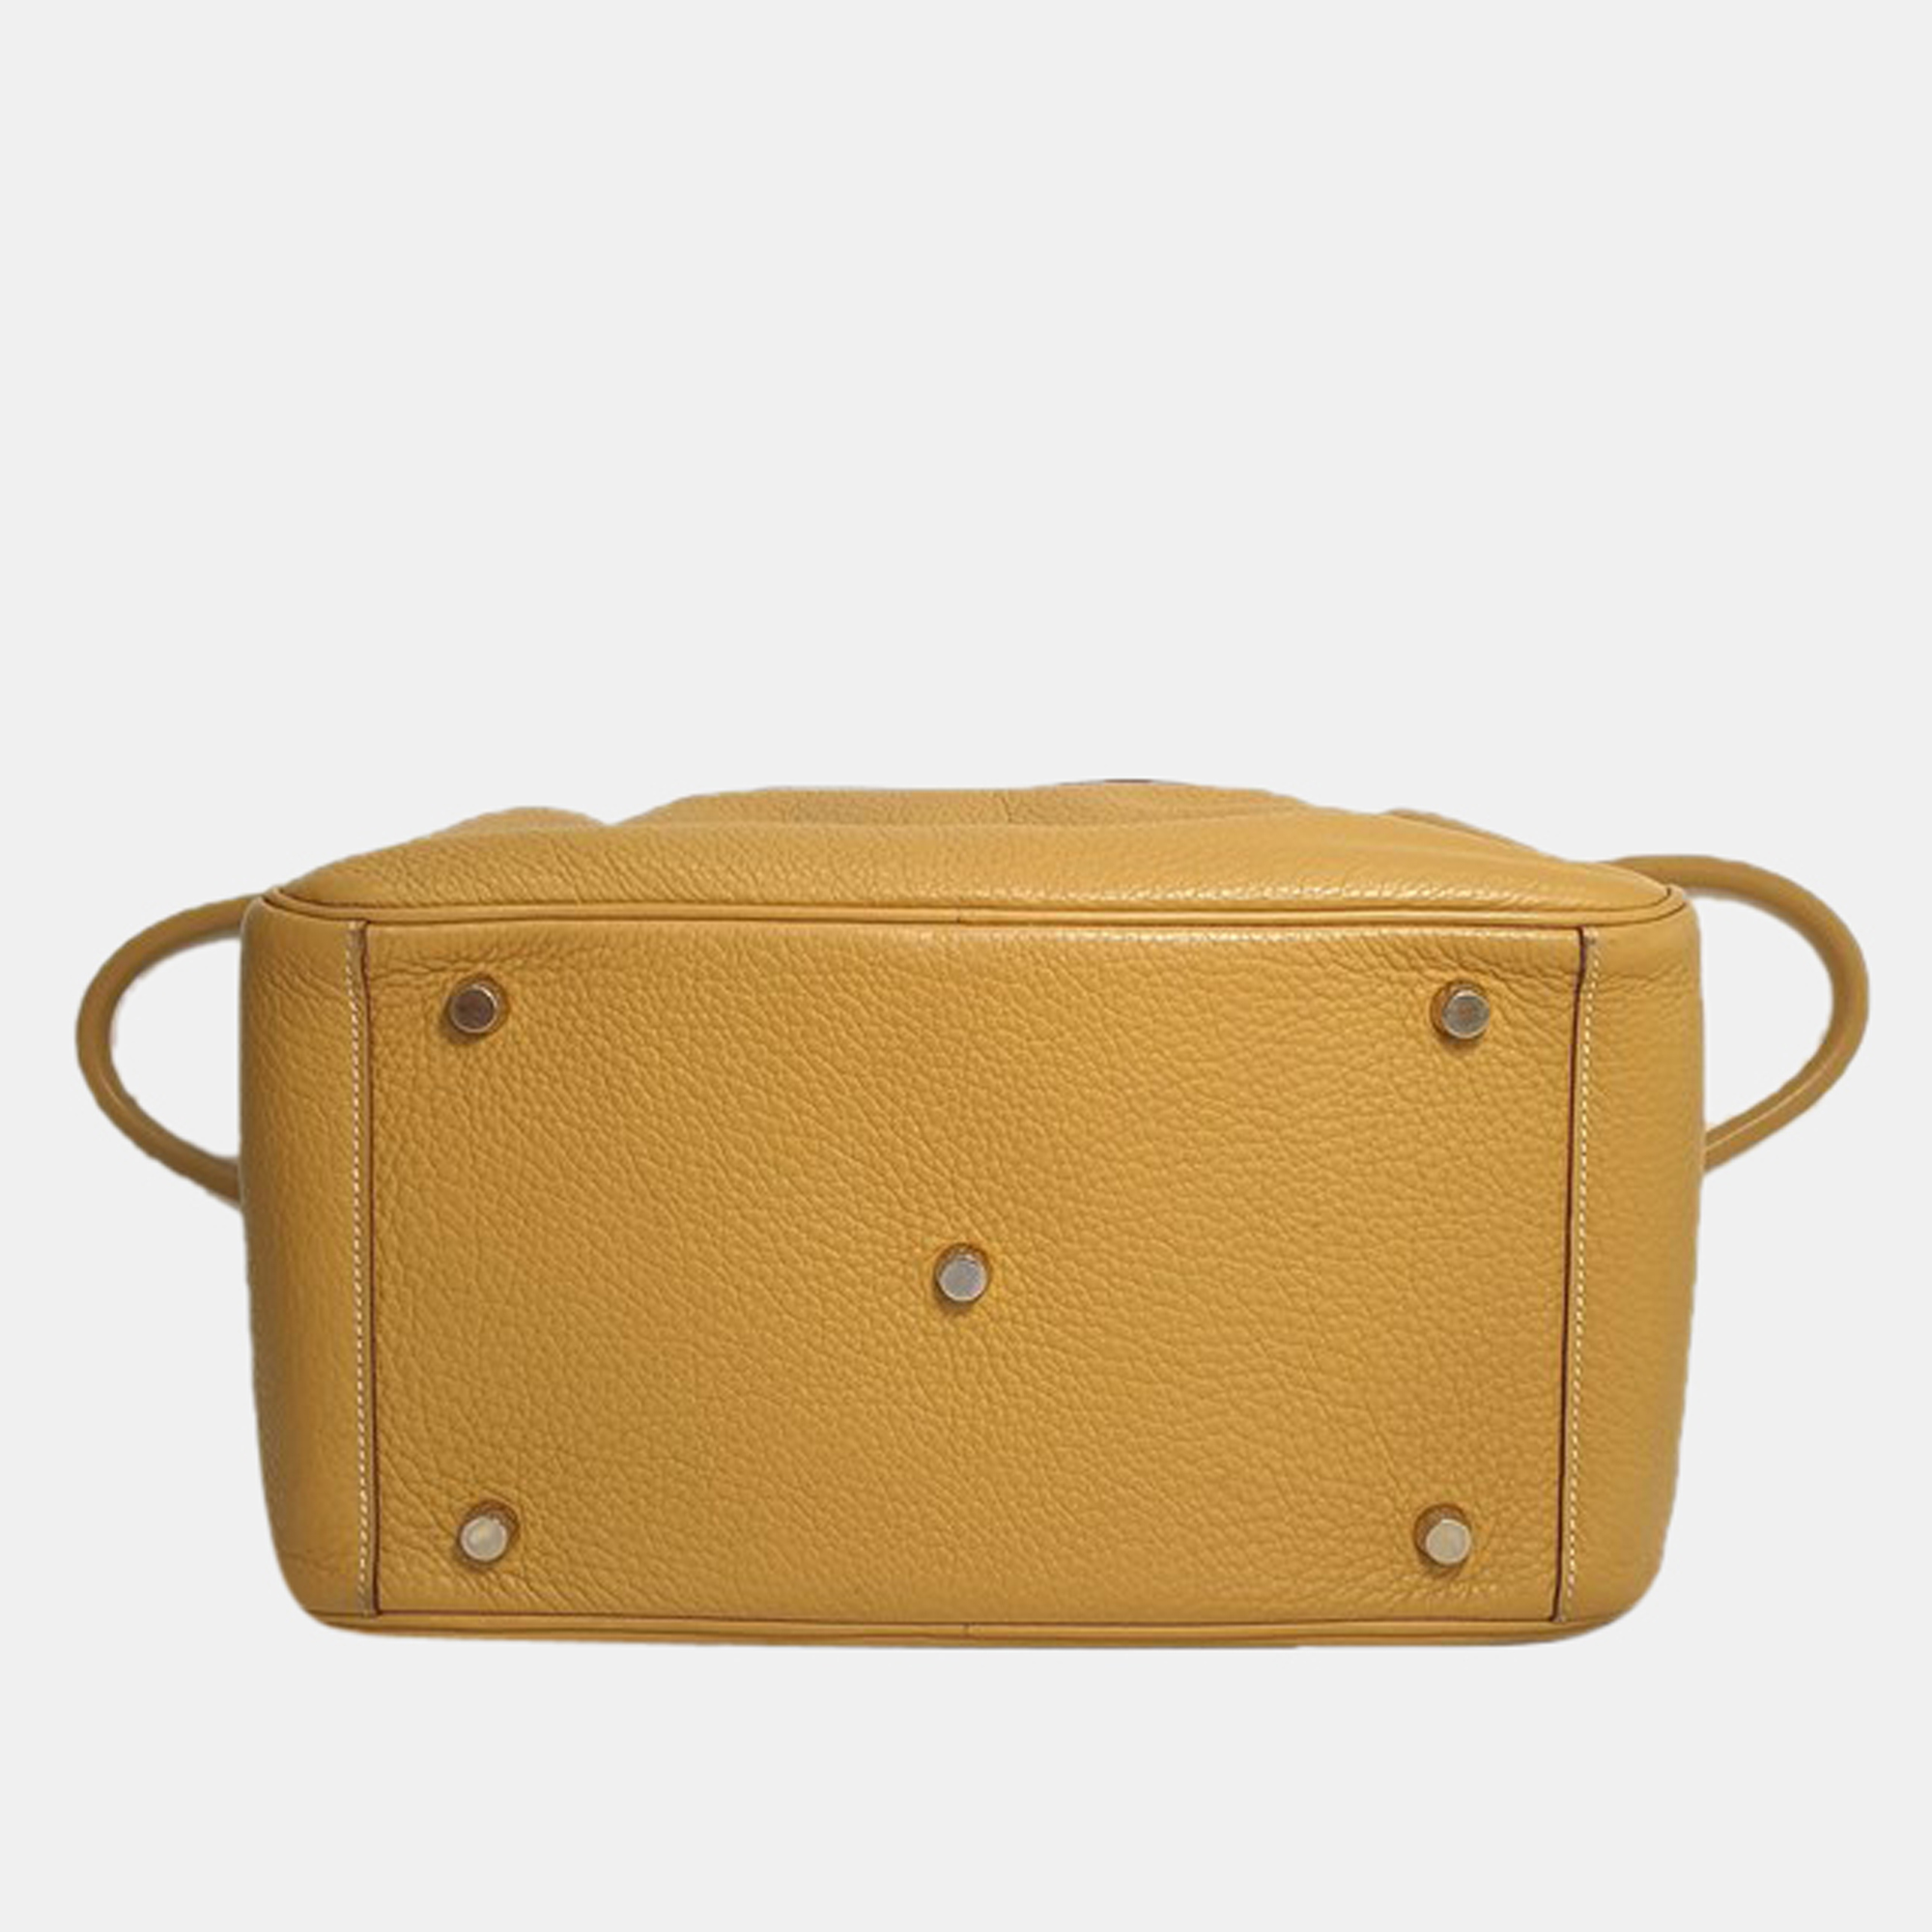 Hermes Yellow Clemence Leather Lindy 30 Shoulder Bag